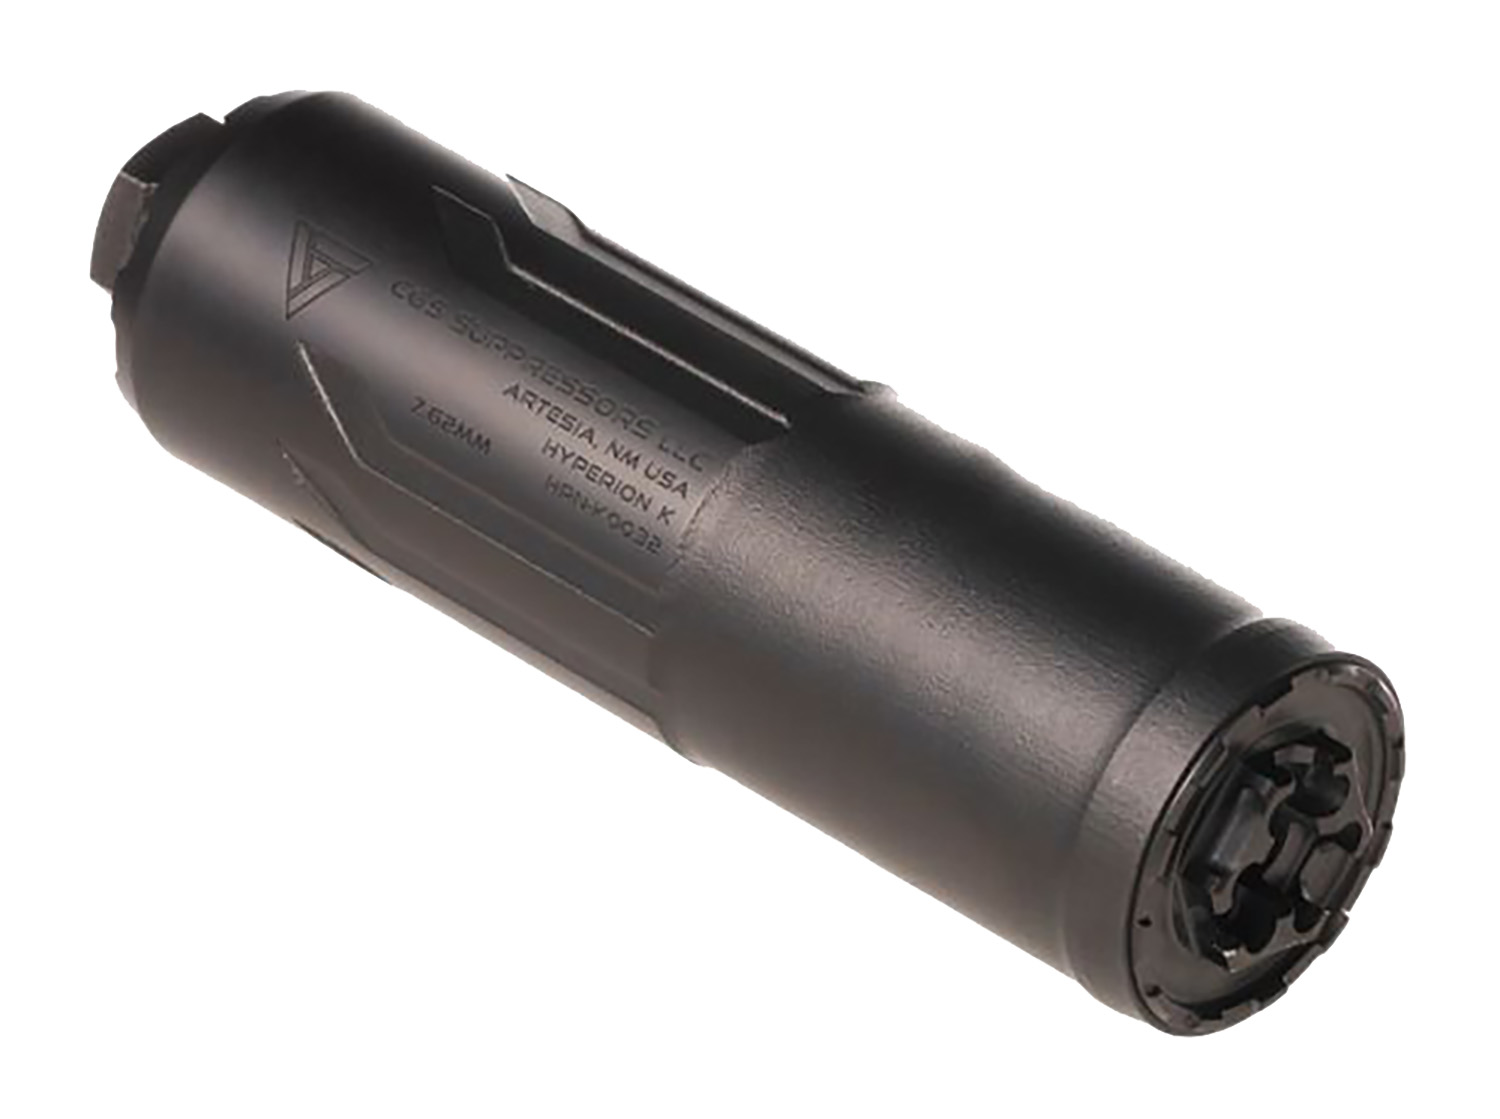 CGS SUPPRESSORS CGS-HYPERION-K Hyperion K Compact 7.62x39mm 6.37